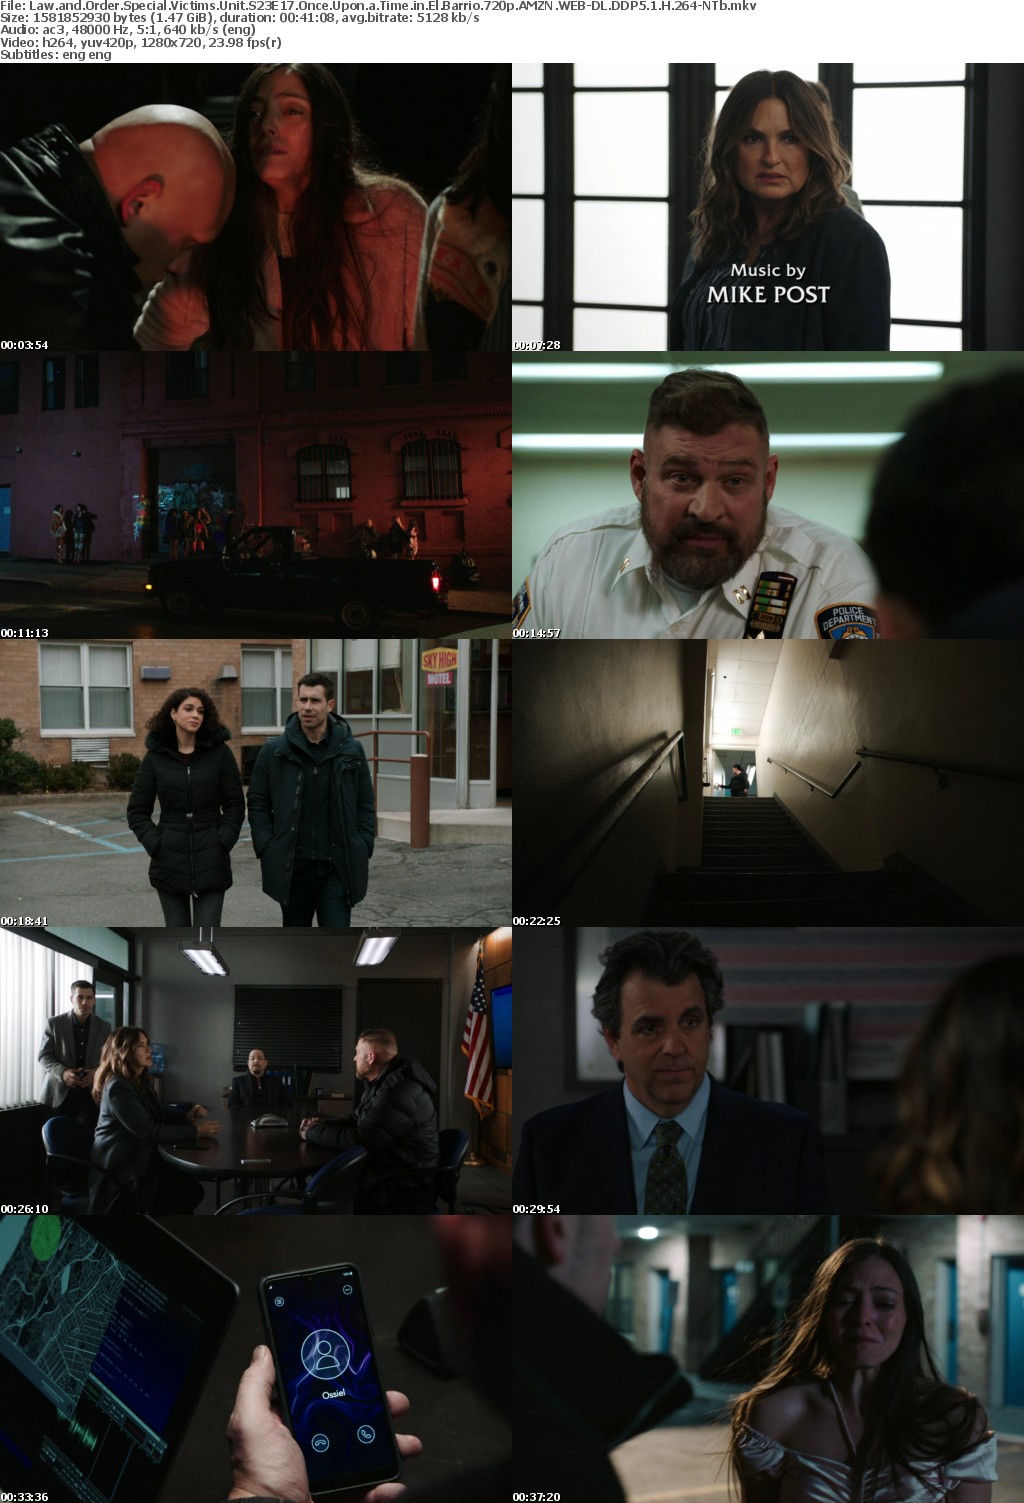 Law and Order SVU S23E17 Once Upon a Time in El Barrio 720p AMZN WEBRip DDP5 1 x264